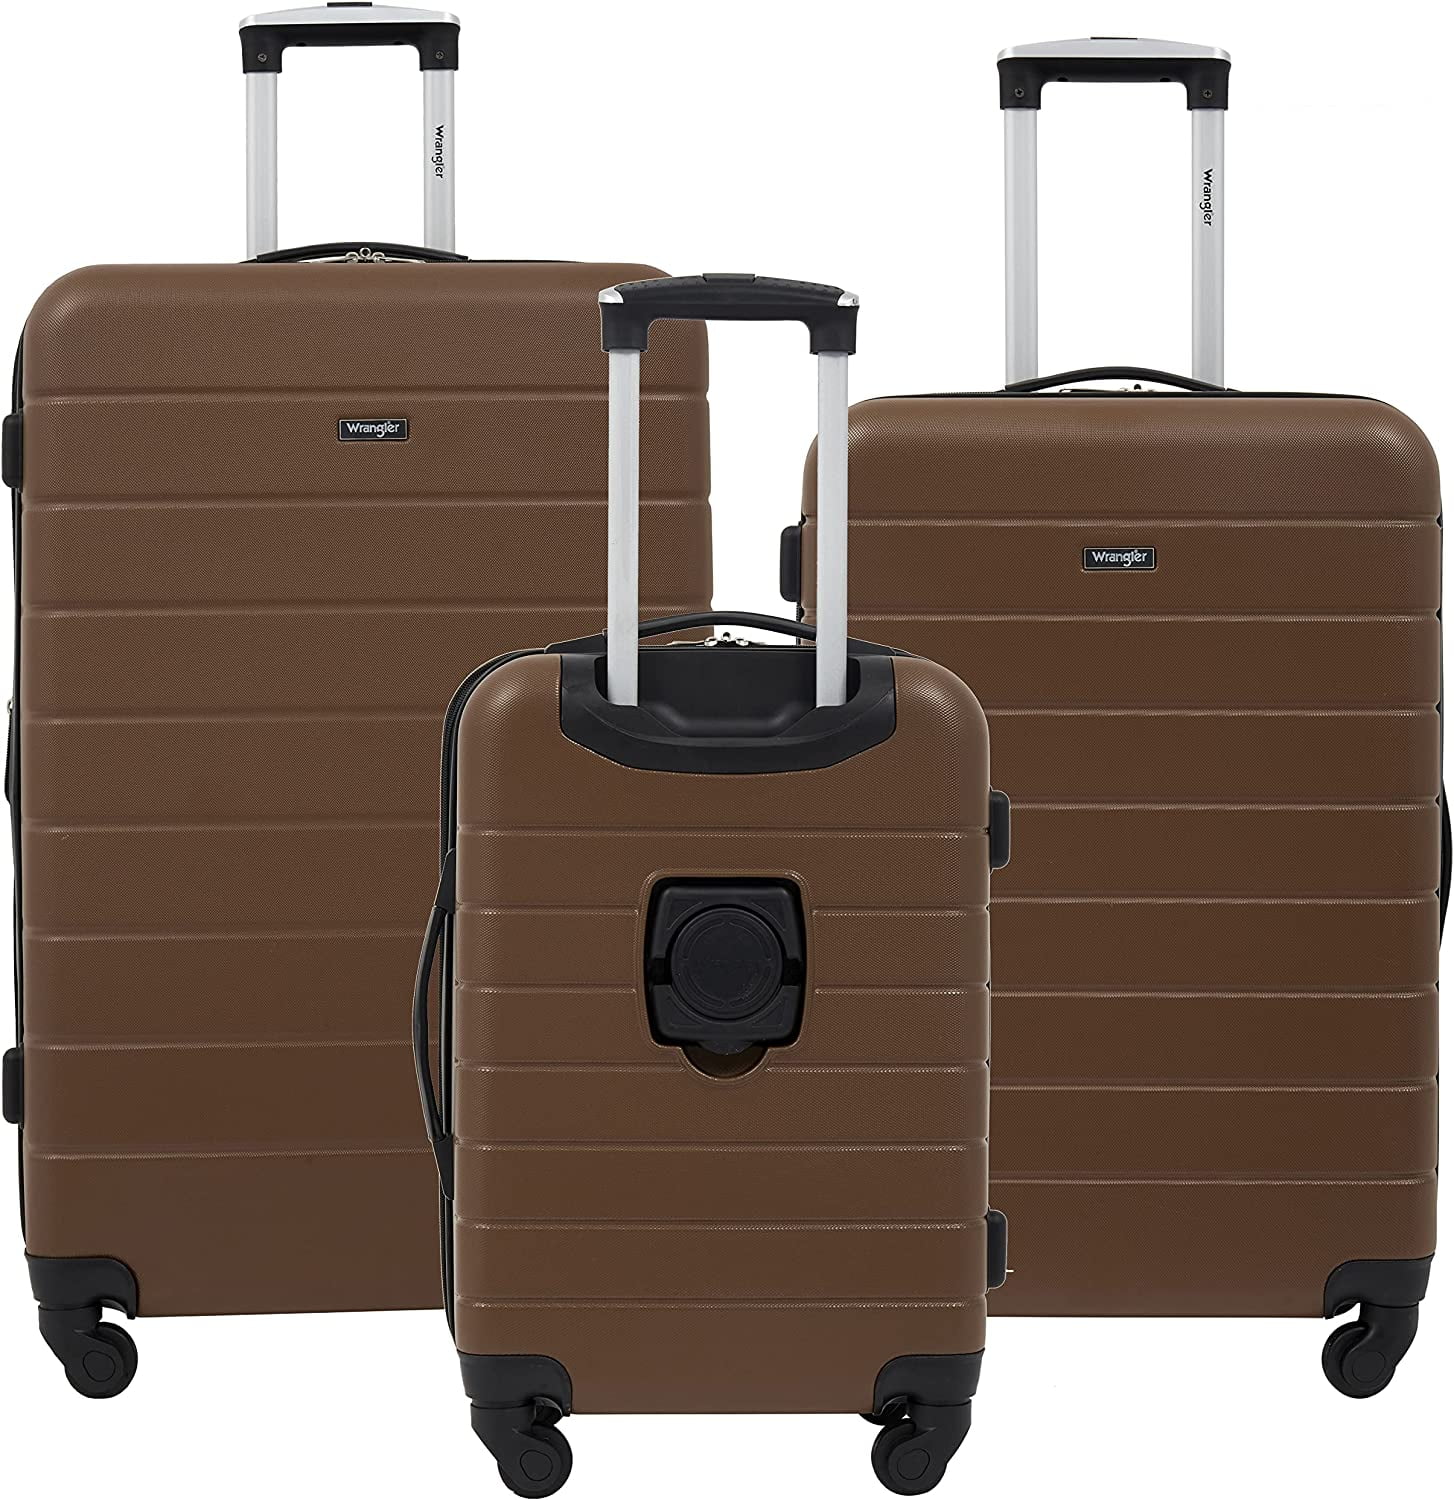 Wrangler Smart Luggage Set with Cup Holder and USB Port Burnt Orange  20-Inch Carry-On 